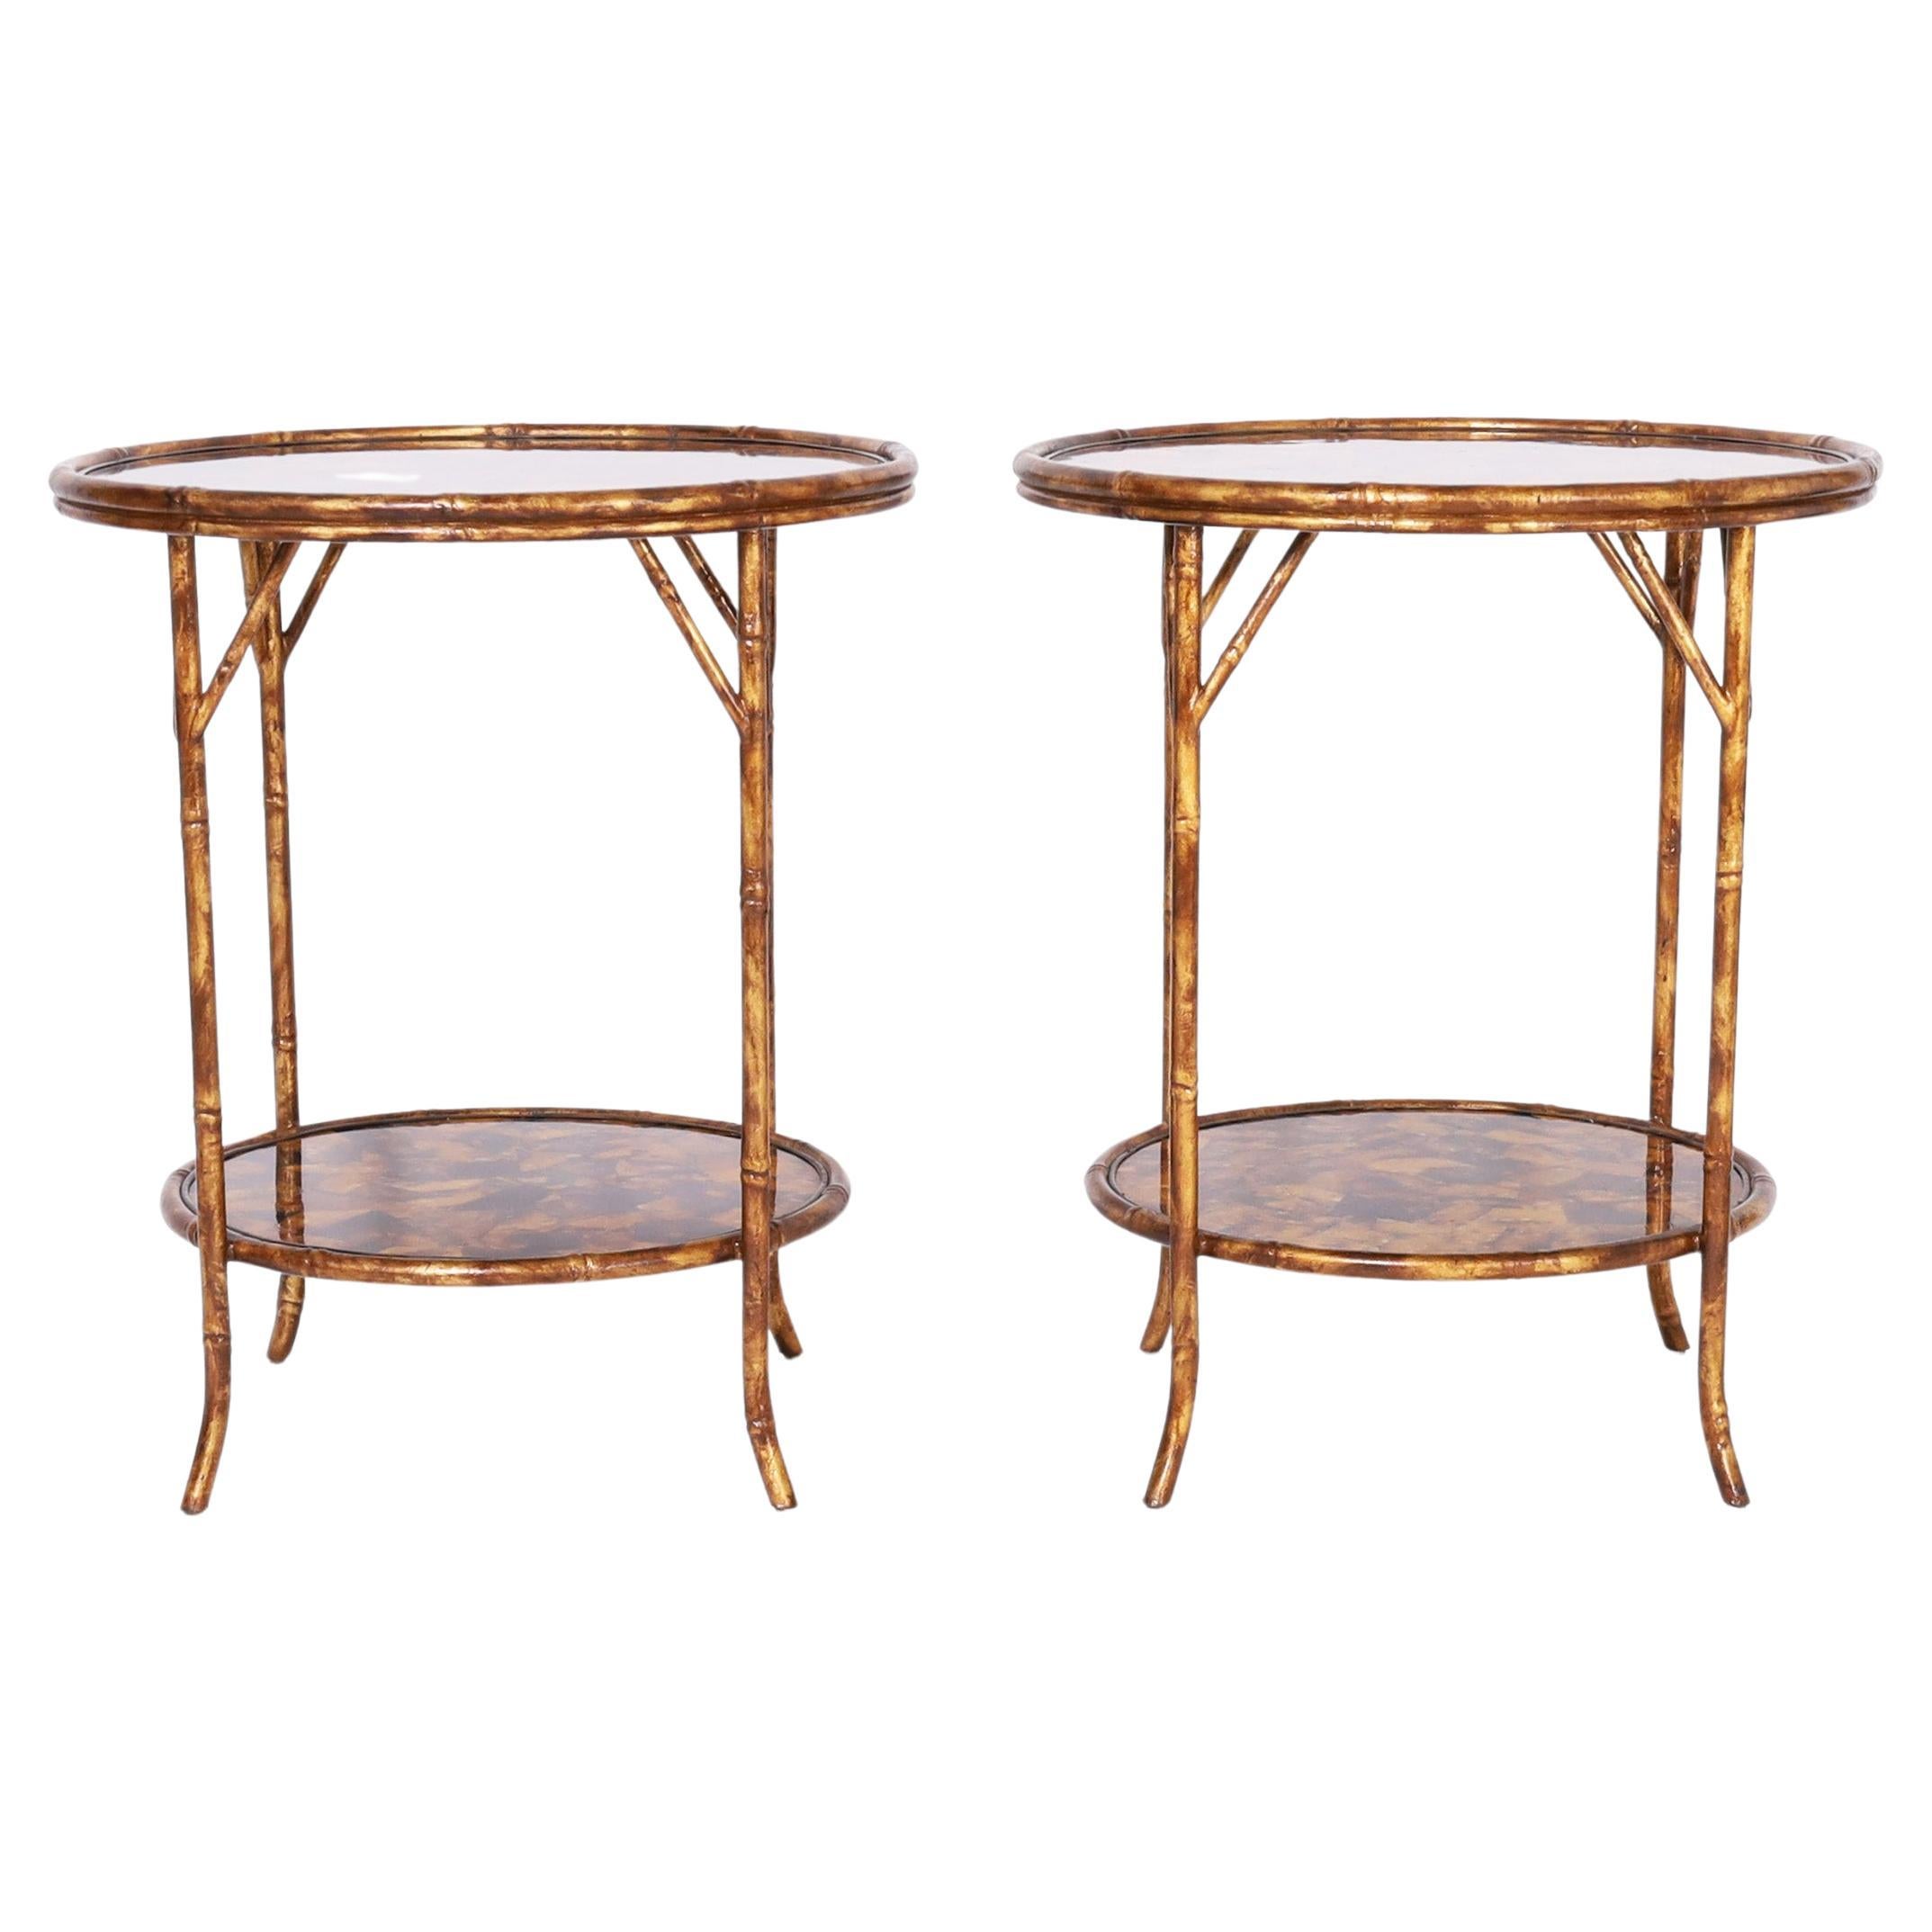 Pair of Faux Bamboo and Penshell Stands or Tables For Sale